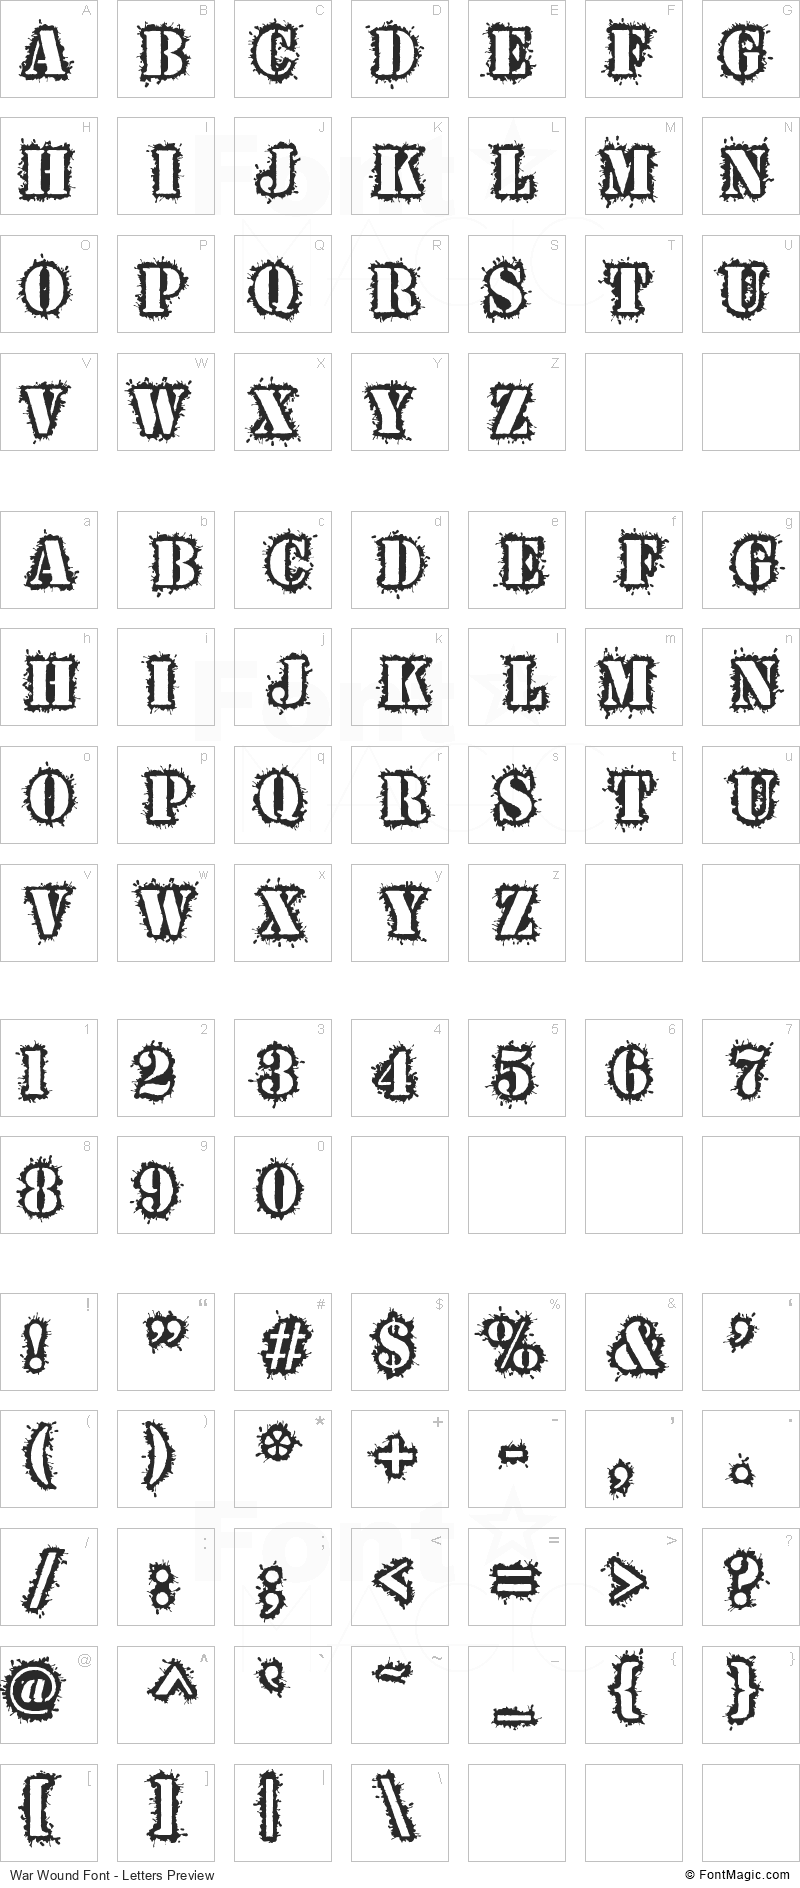 War Wound Font - All Latters Preview Chart